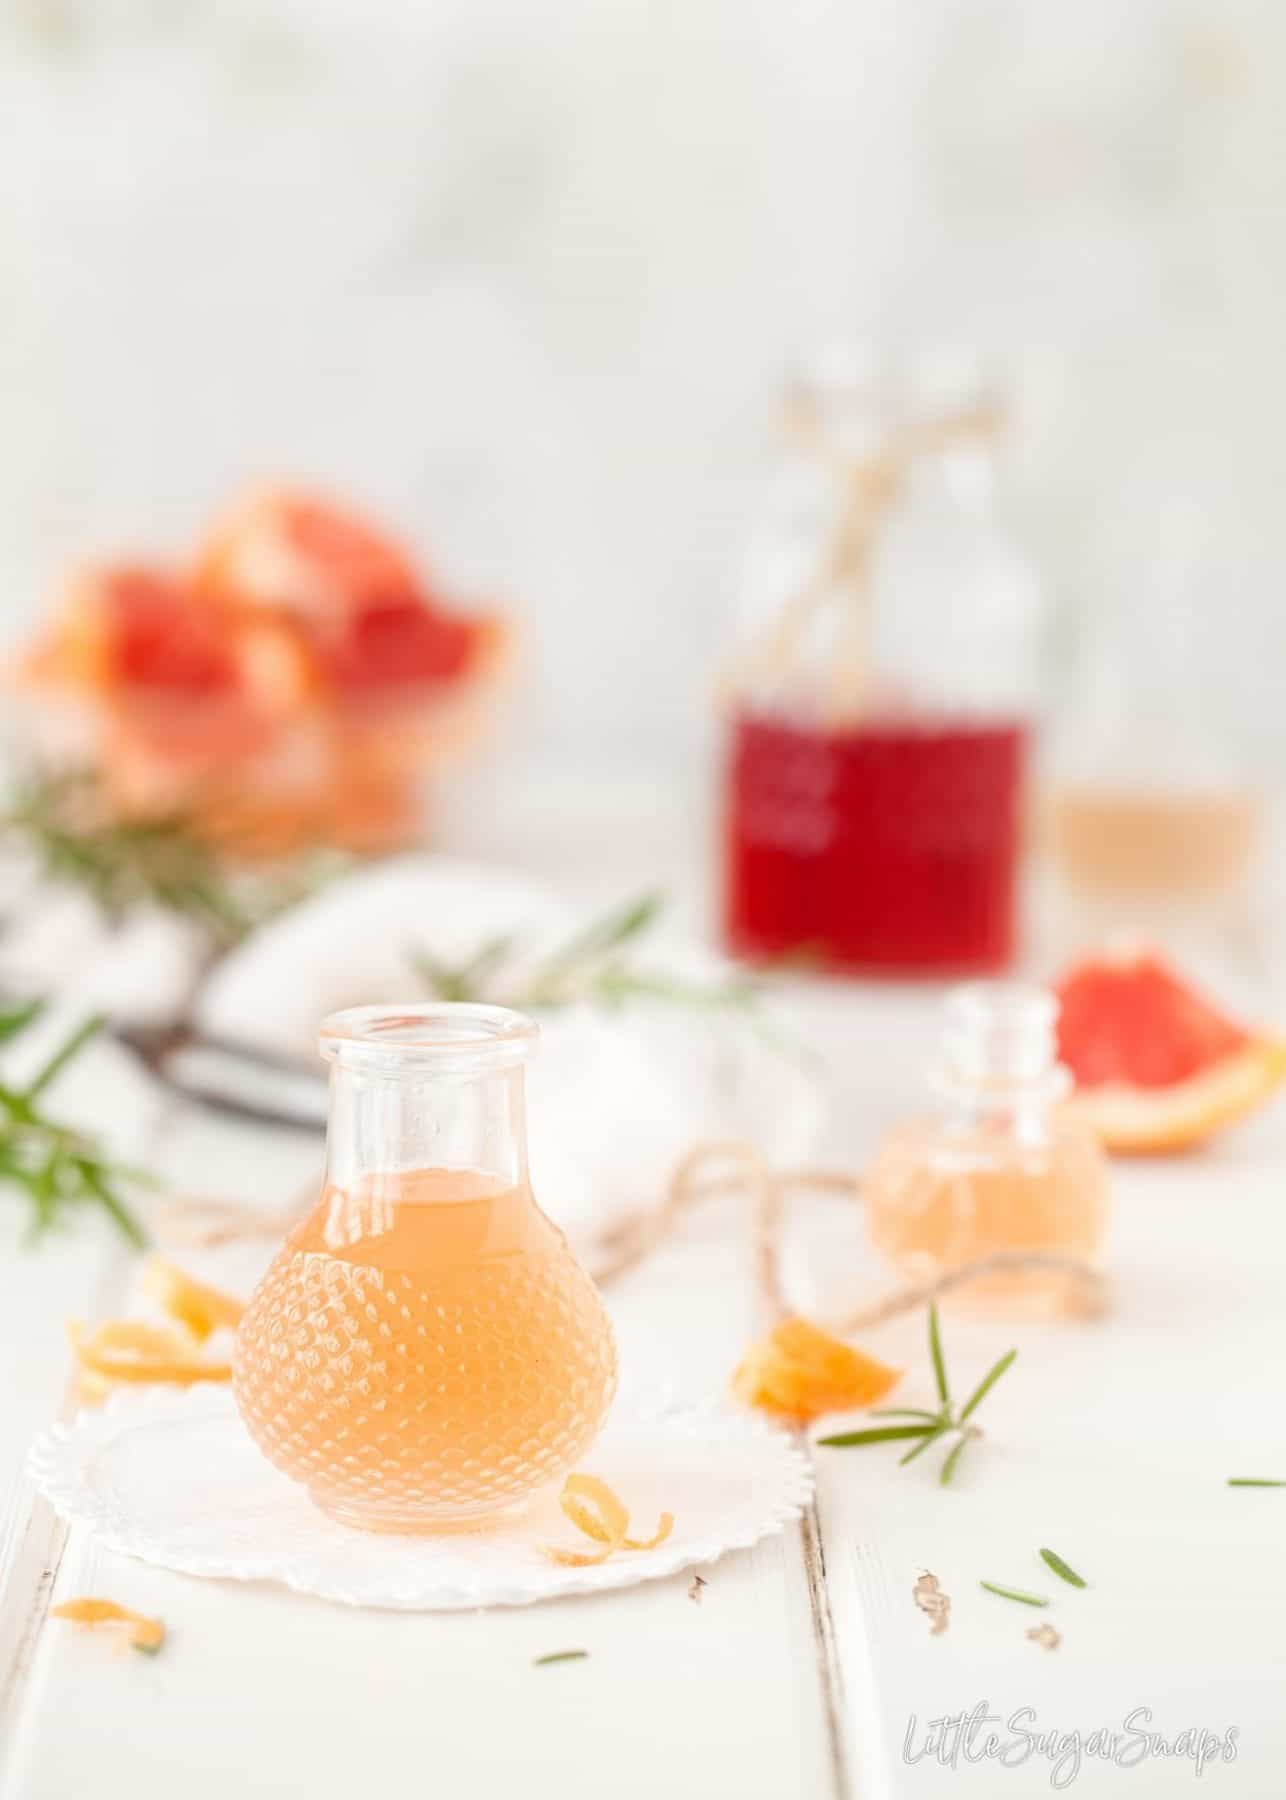 Grapefruit syrup in a small bottle.